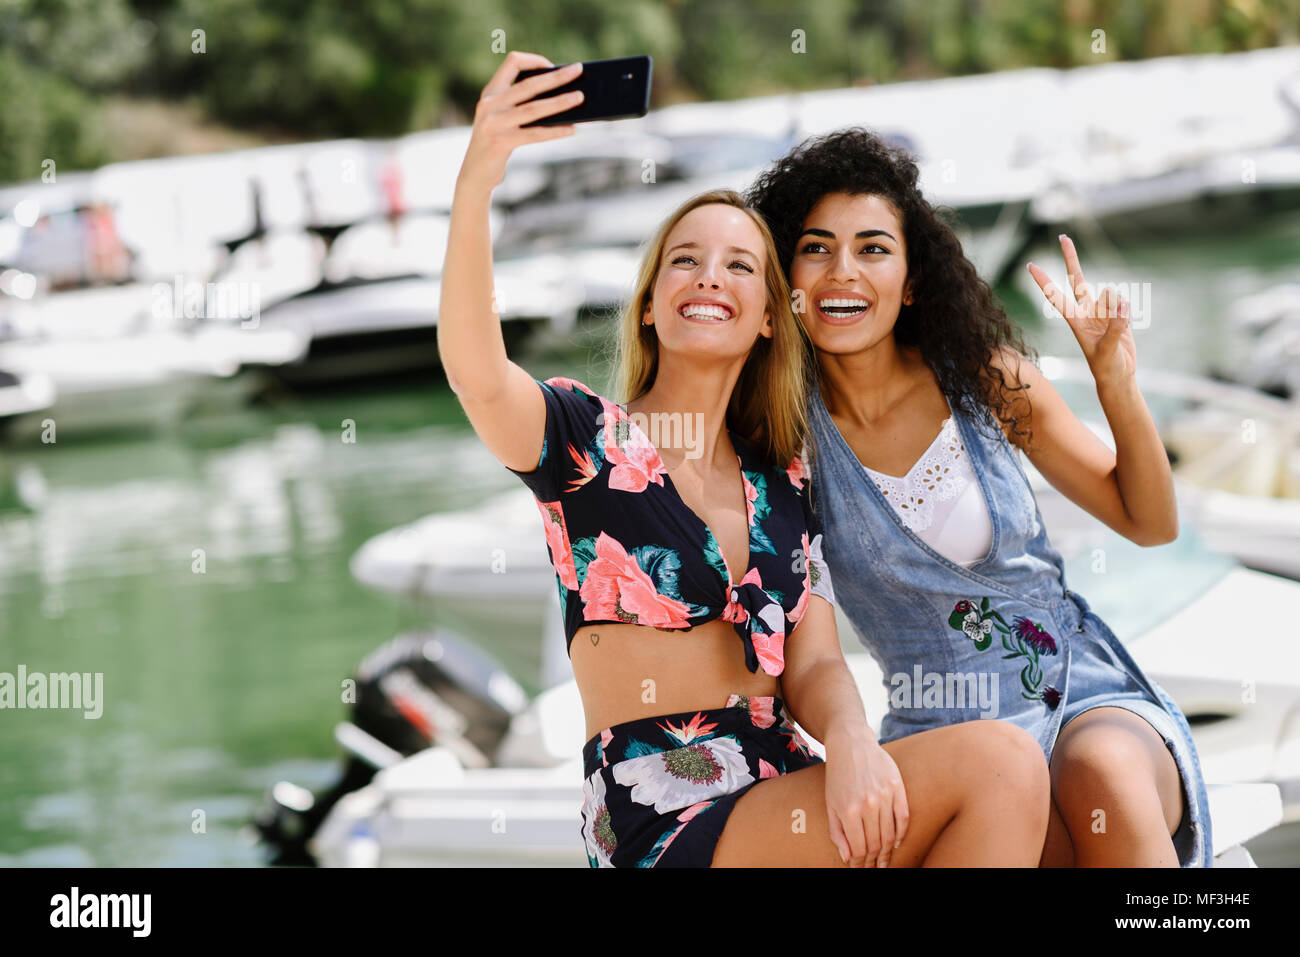 Spain, Andalusia, Marbella. Two multiracial traveler women taking a selfie photograph with smart phone together in boat harbor. Lifestyle concept. Stock Photo